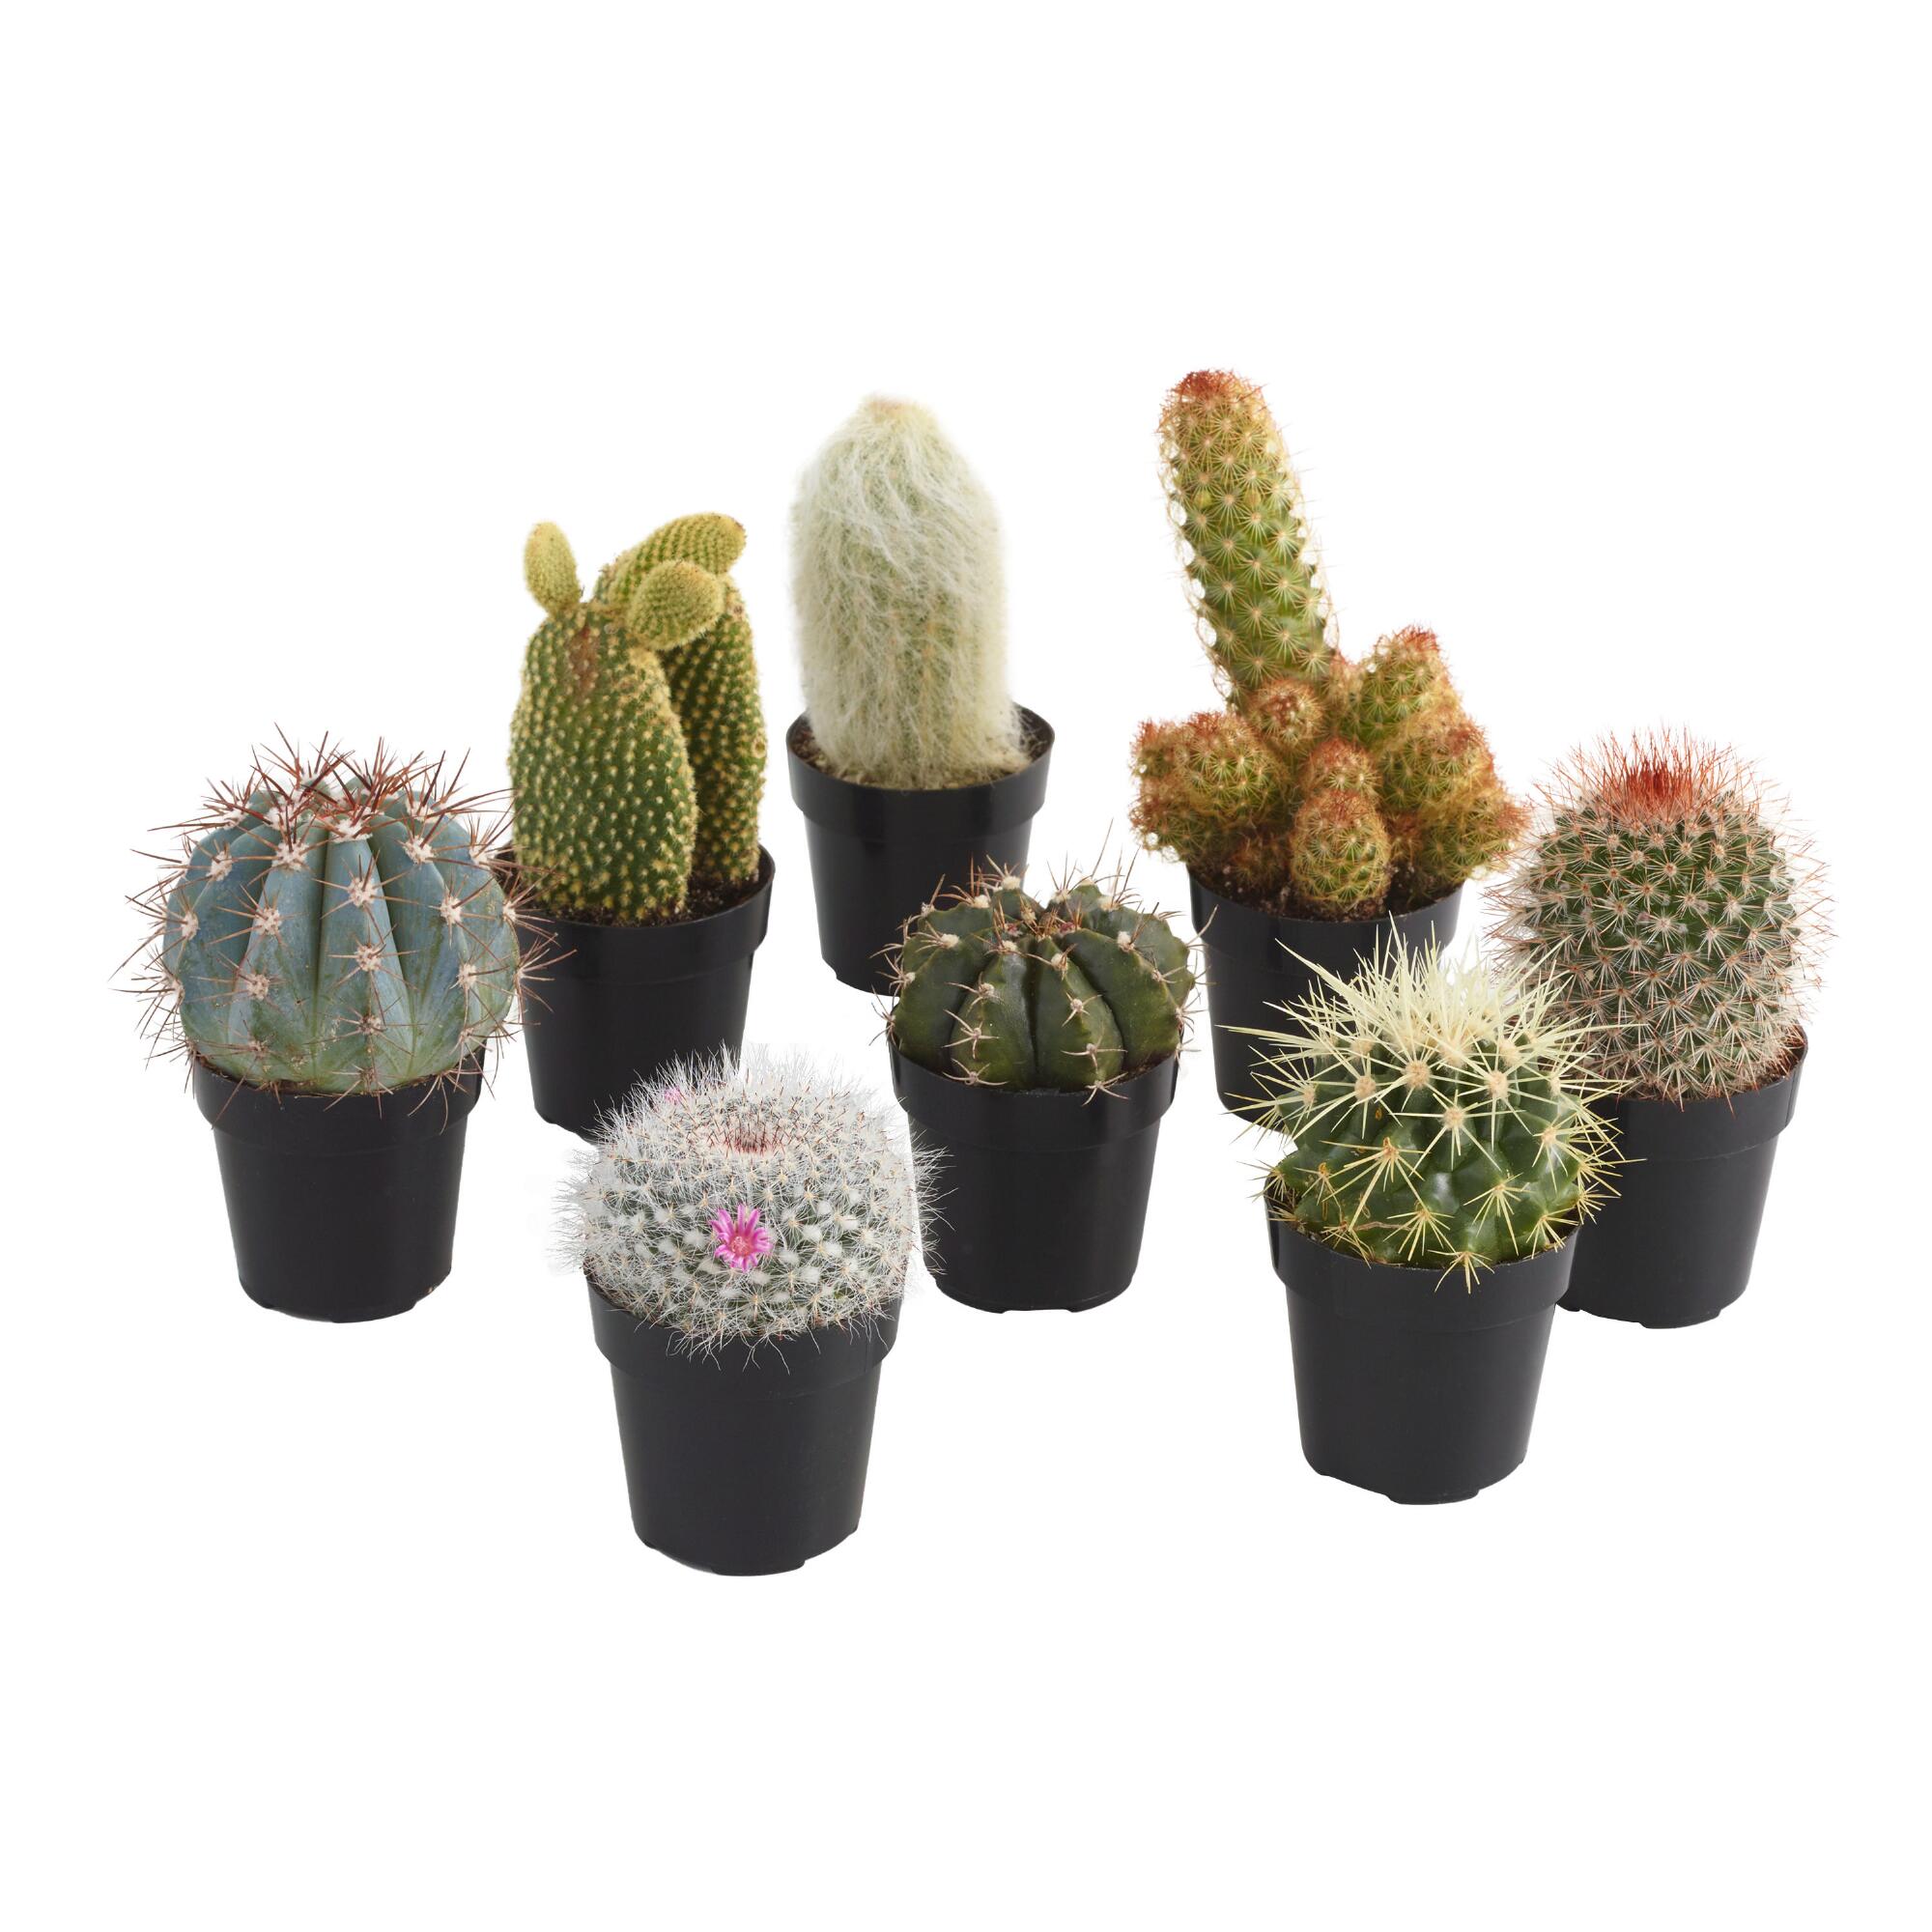 Small Assorted Live Potted Cacti Set of 3 by World Market